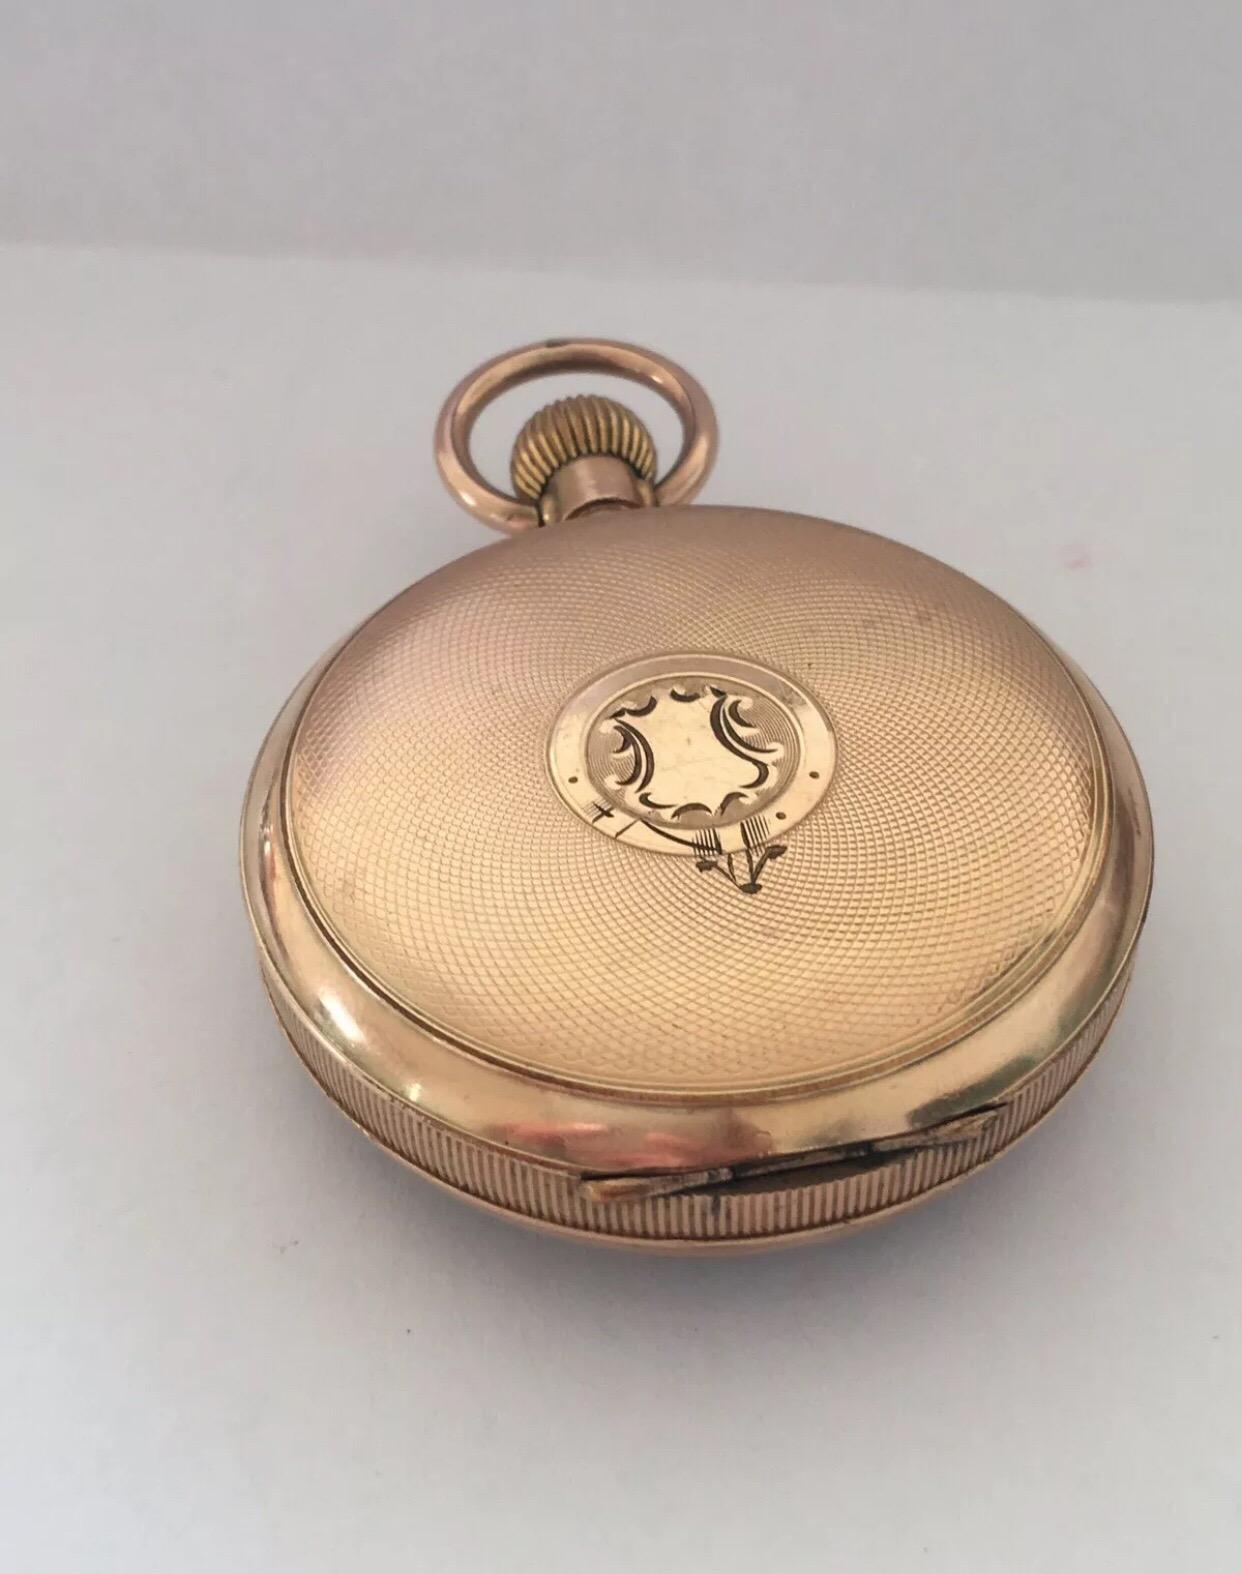 An 8 Days Swiss Made Hebdomas Visible Escapement Gold-Plated Pocket Watch 3